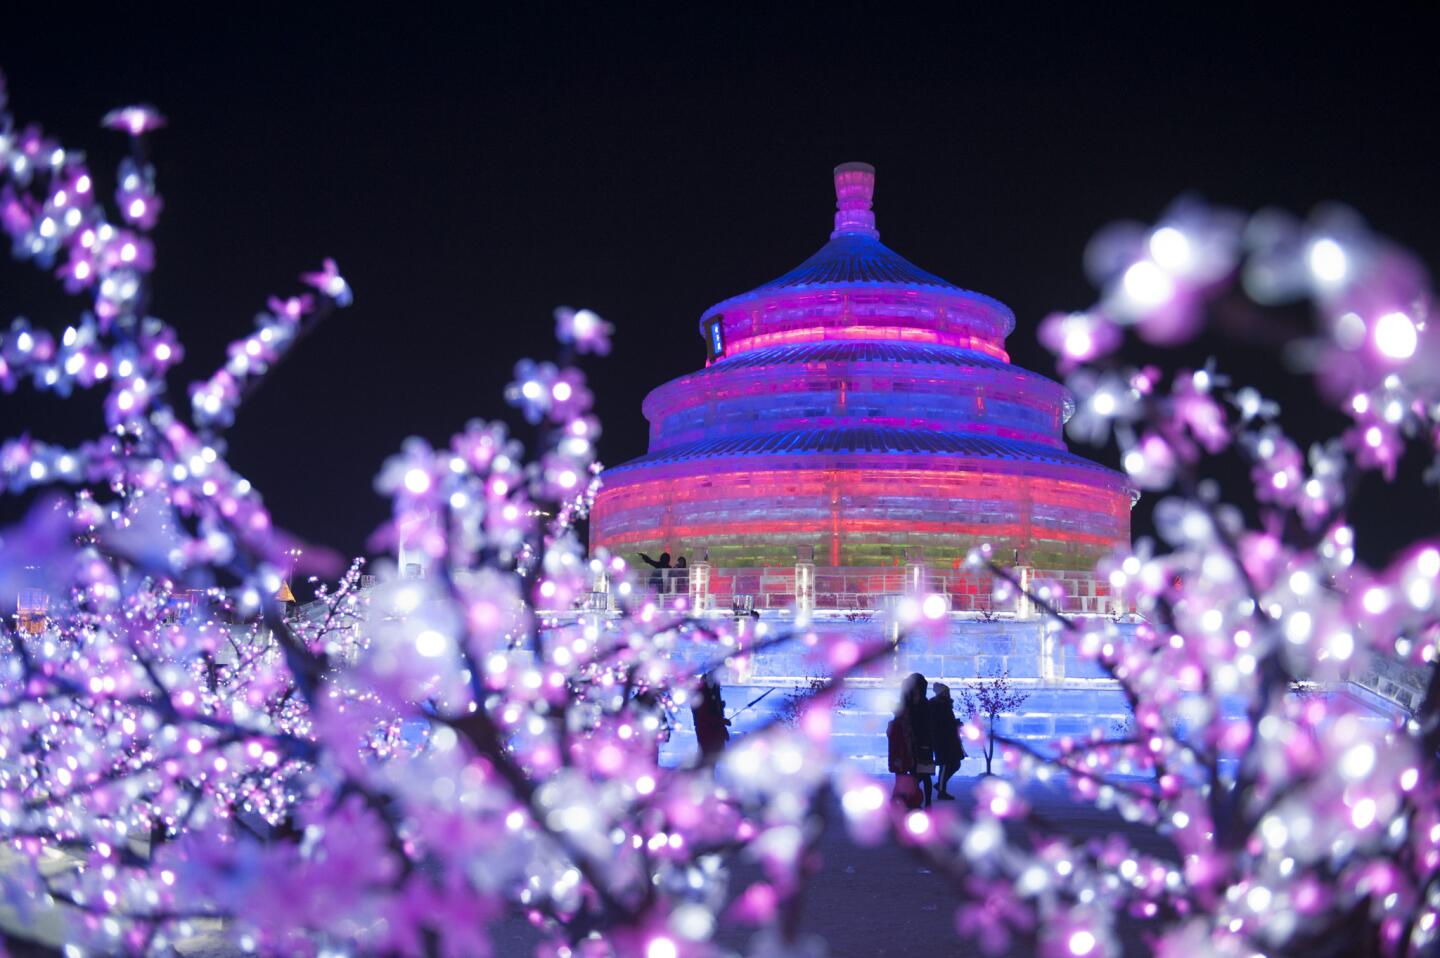 Light lends magic to the icy cityscape built for the Harbin International Ice and Snow Sculpture Festival.